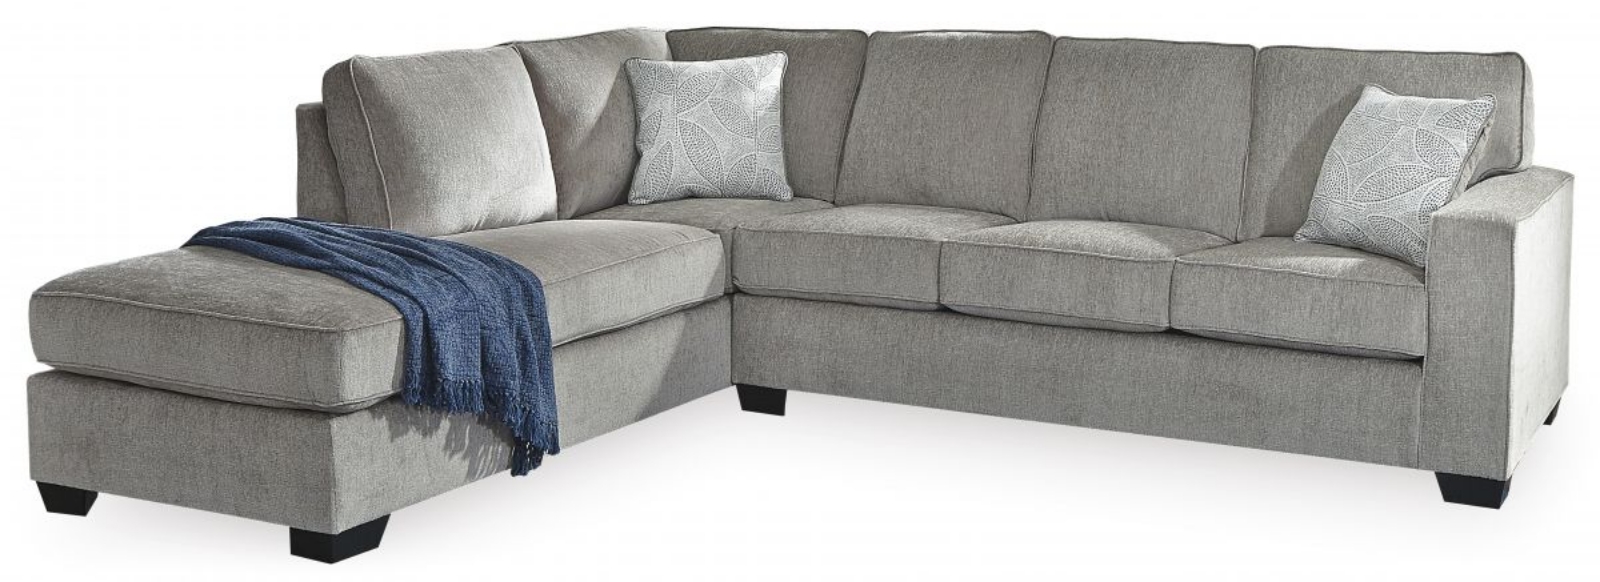 Picture of Altari Sectional